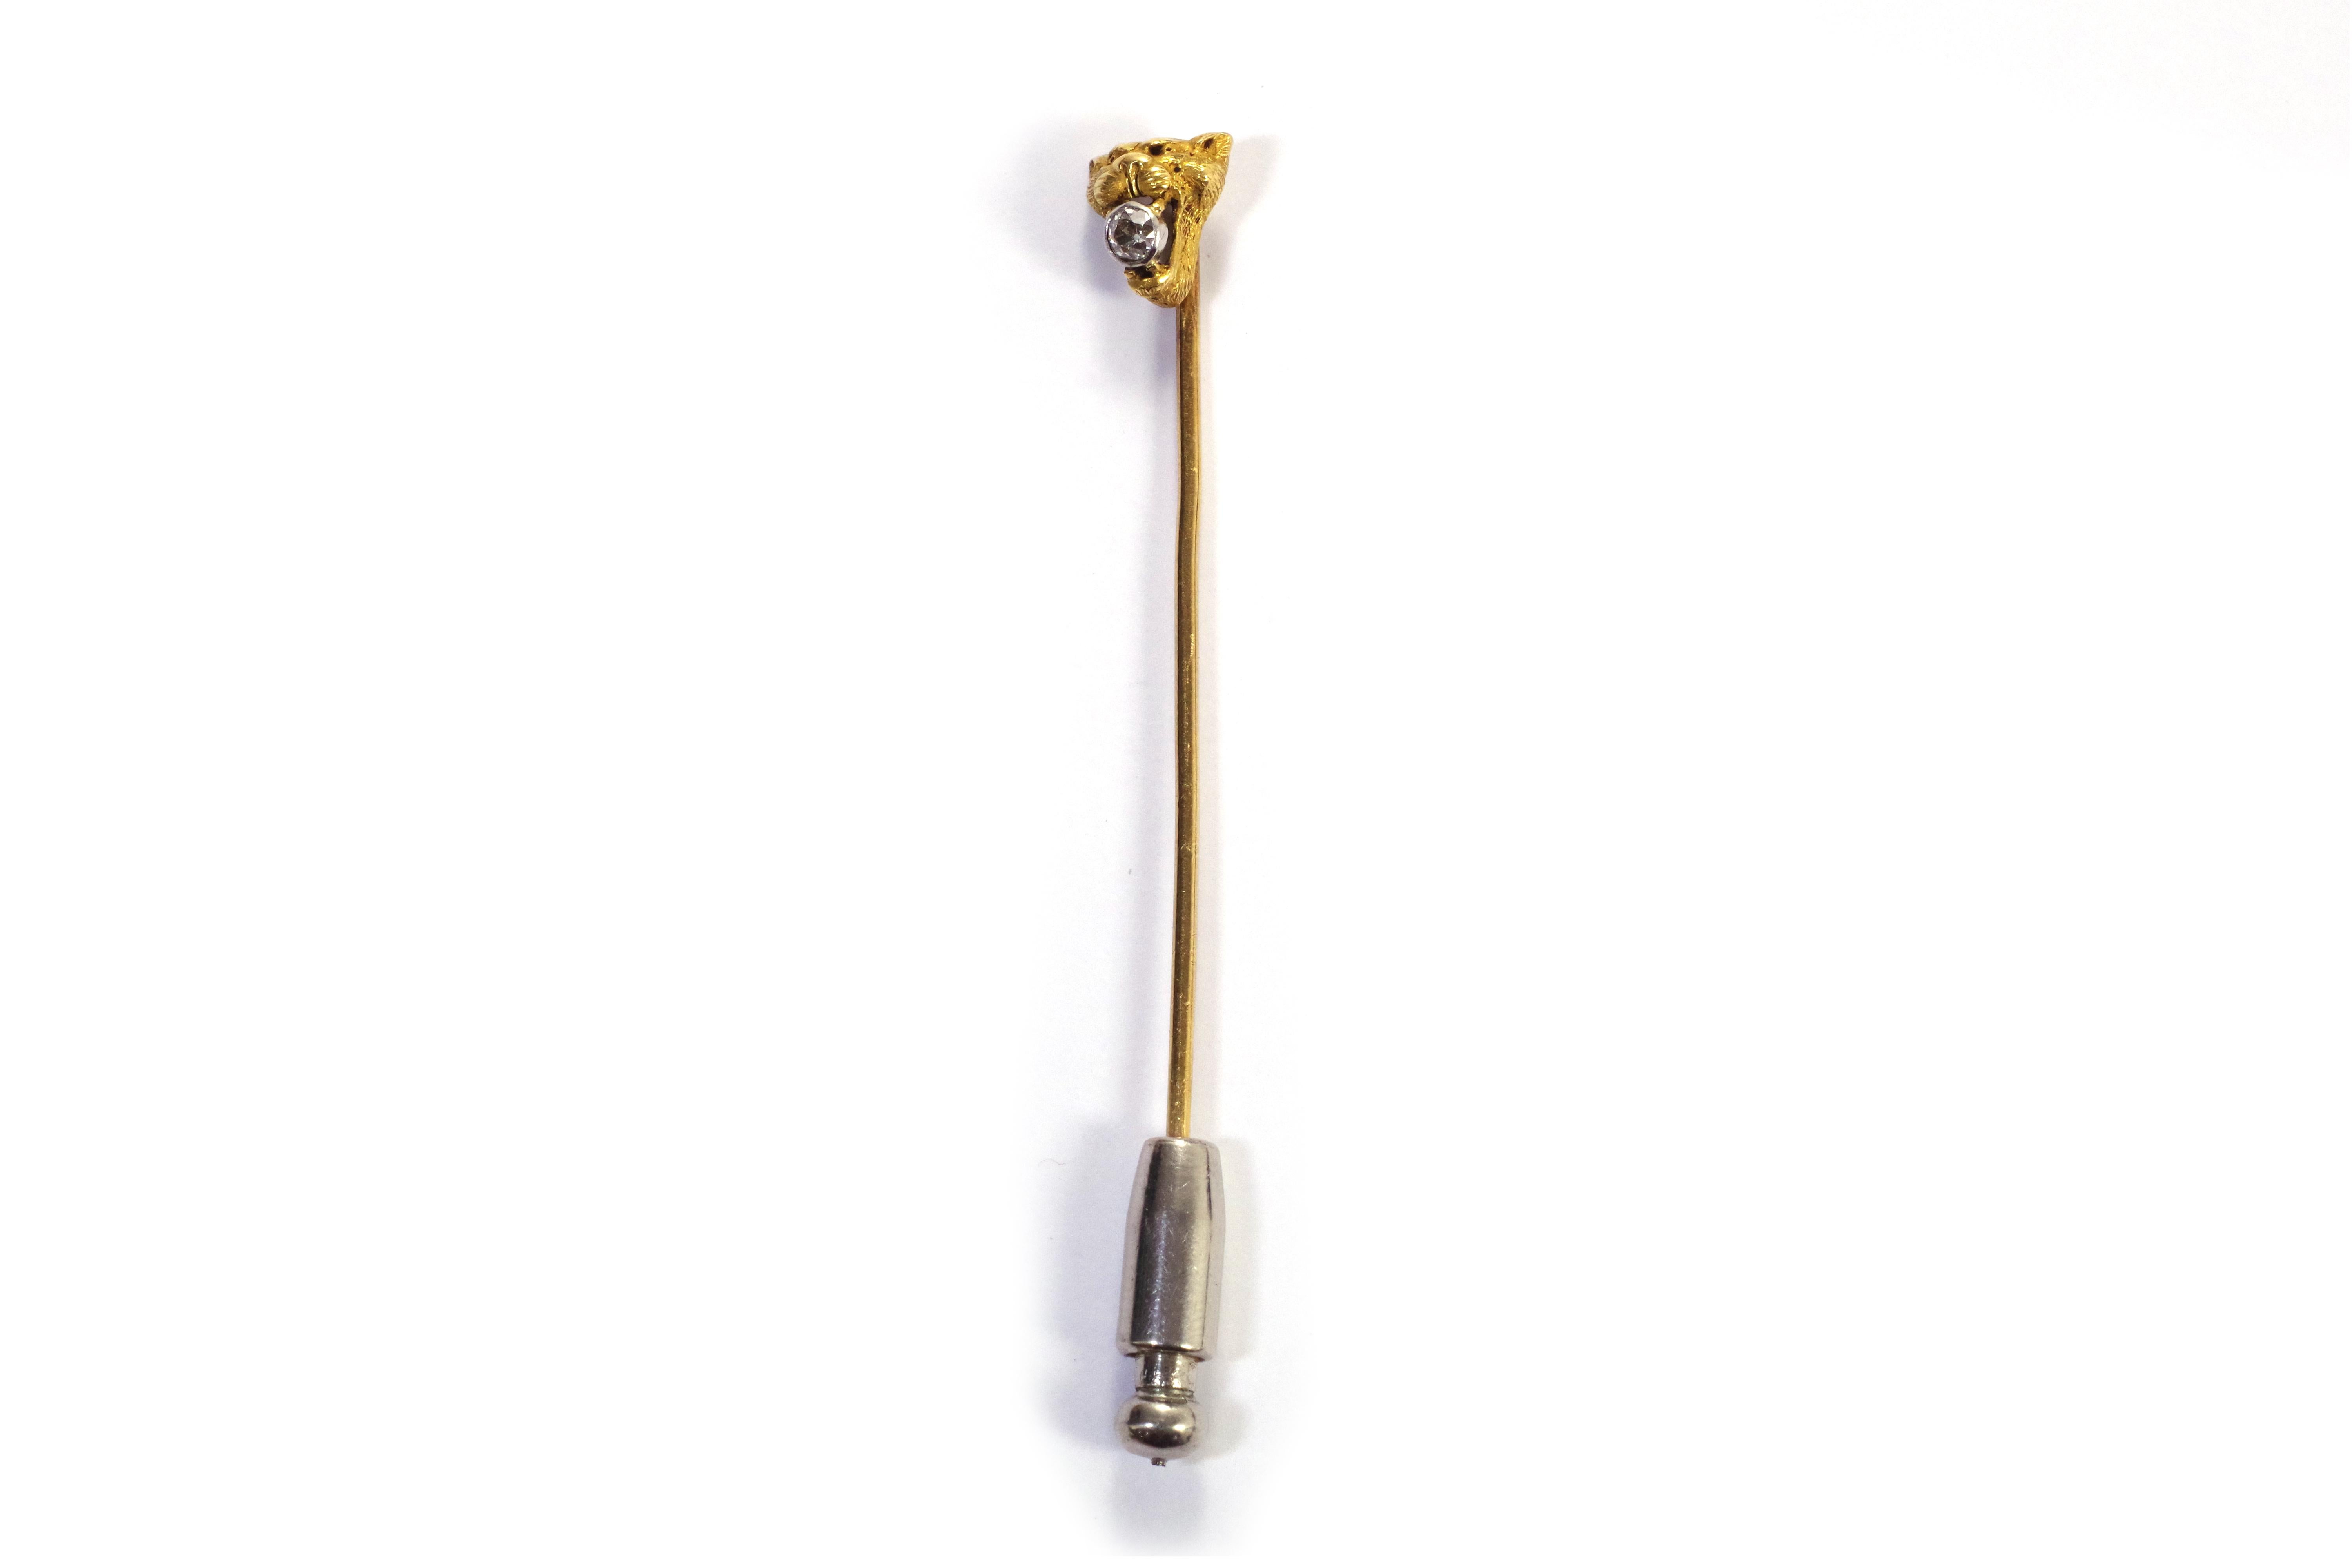 Edwardian lioness tie pin in 18-karat yellow gold and platinum. It features the head of a lioness with an open mouth, holding an old mine cut diamond set in a closed setting. The lioness's head is intricately detailed, showcasing its fur. The